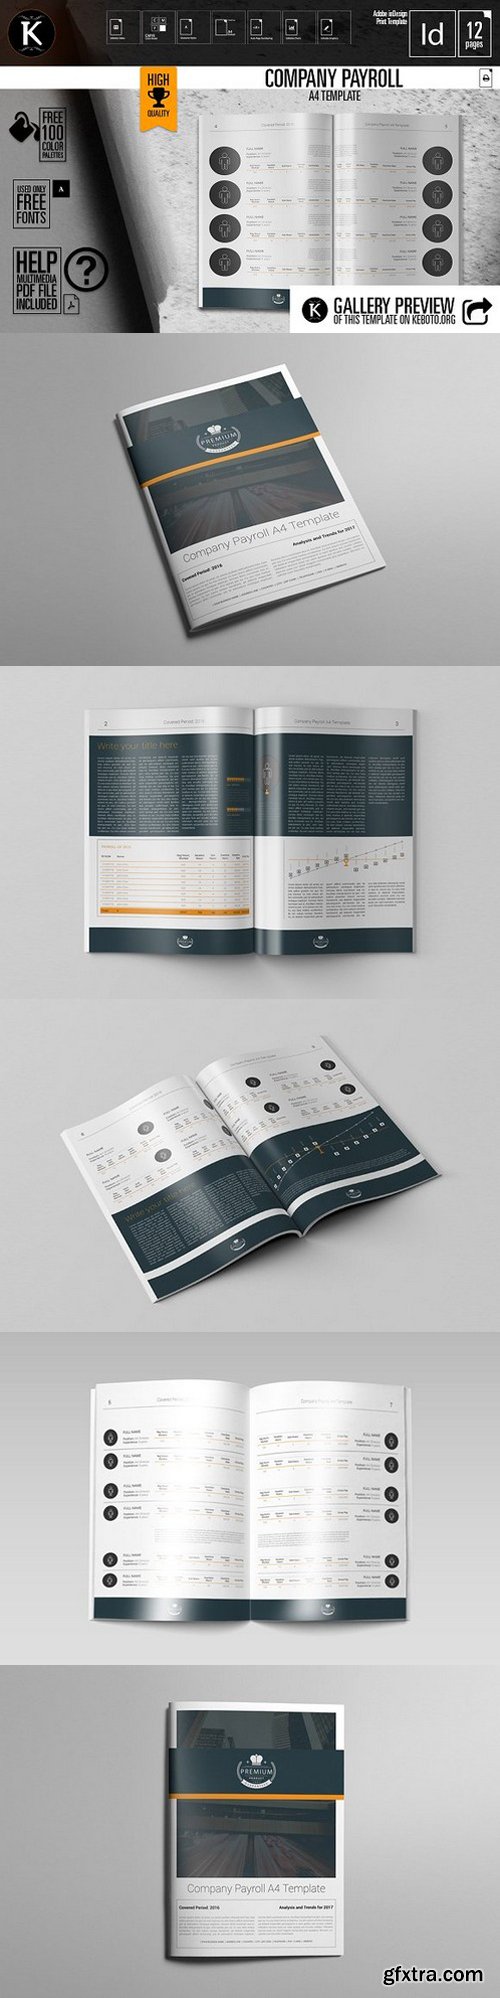 Company Payroll A4 Template